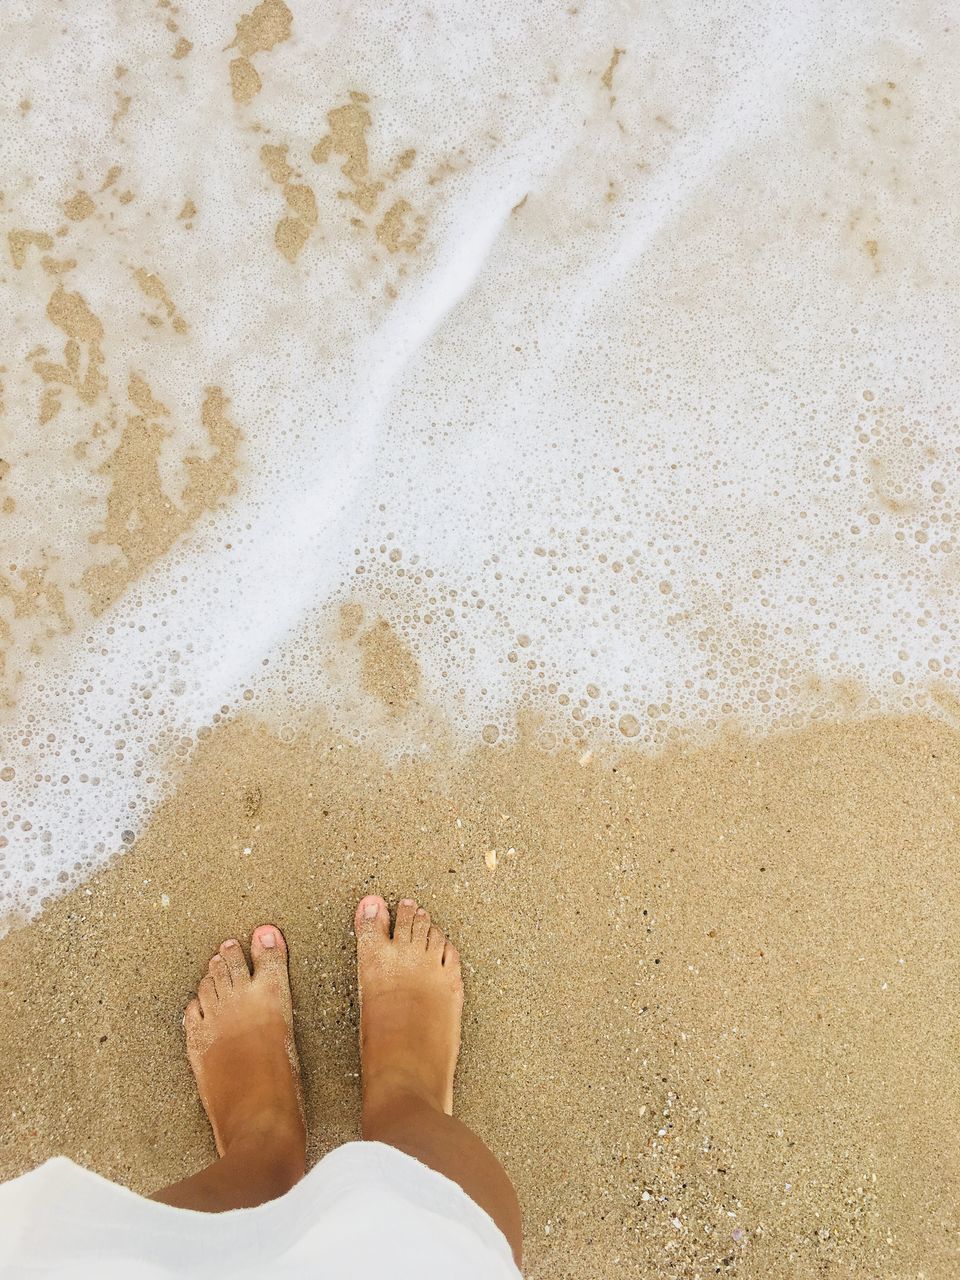 barefoot, low section, human body part, human leg, sand, body part, one person, beach, human foot, water, land, real people, sea, leisure activity, aquatic sport, personal perspective, surfing, lifestyles, directly above, outdoors, human limb